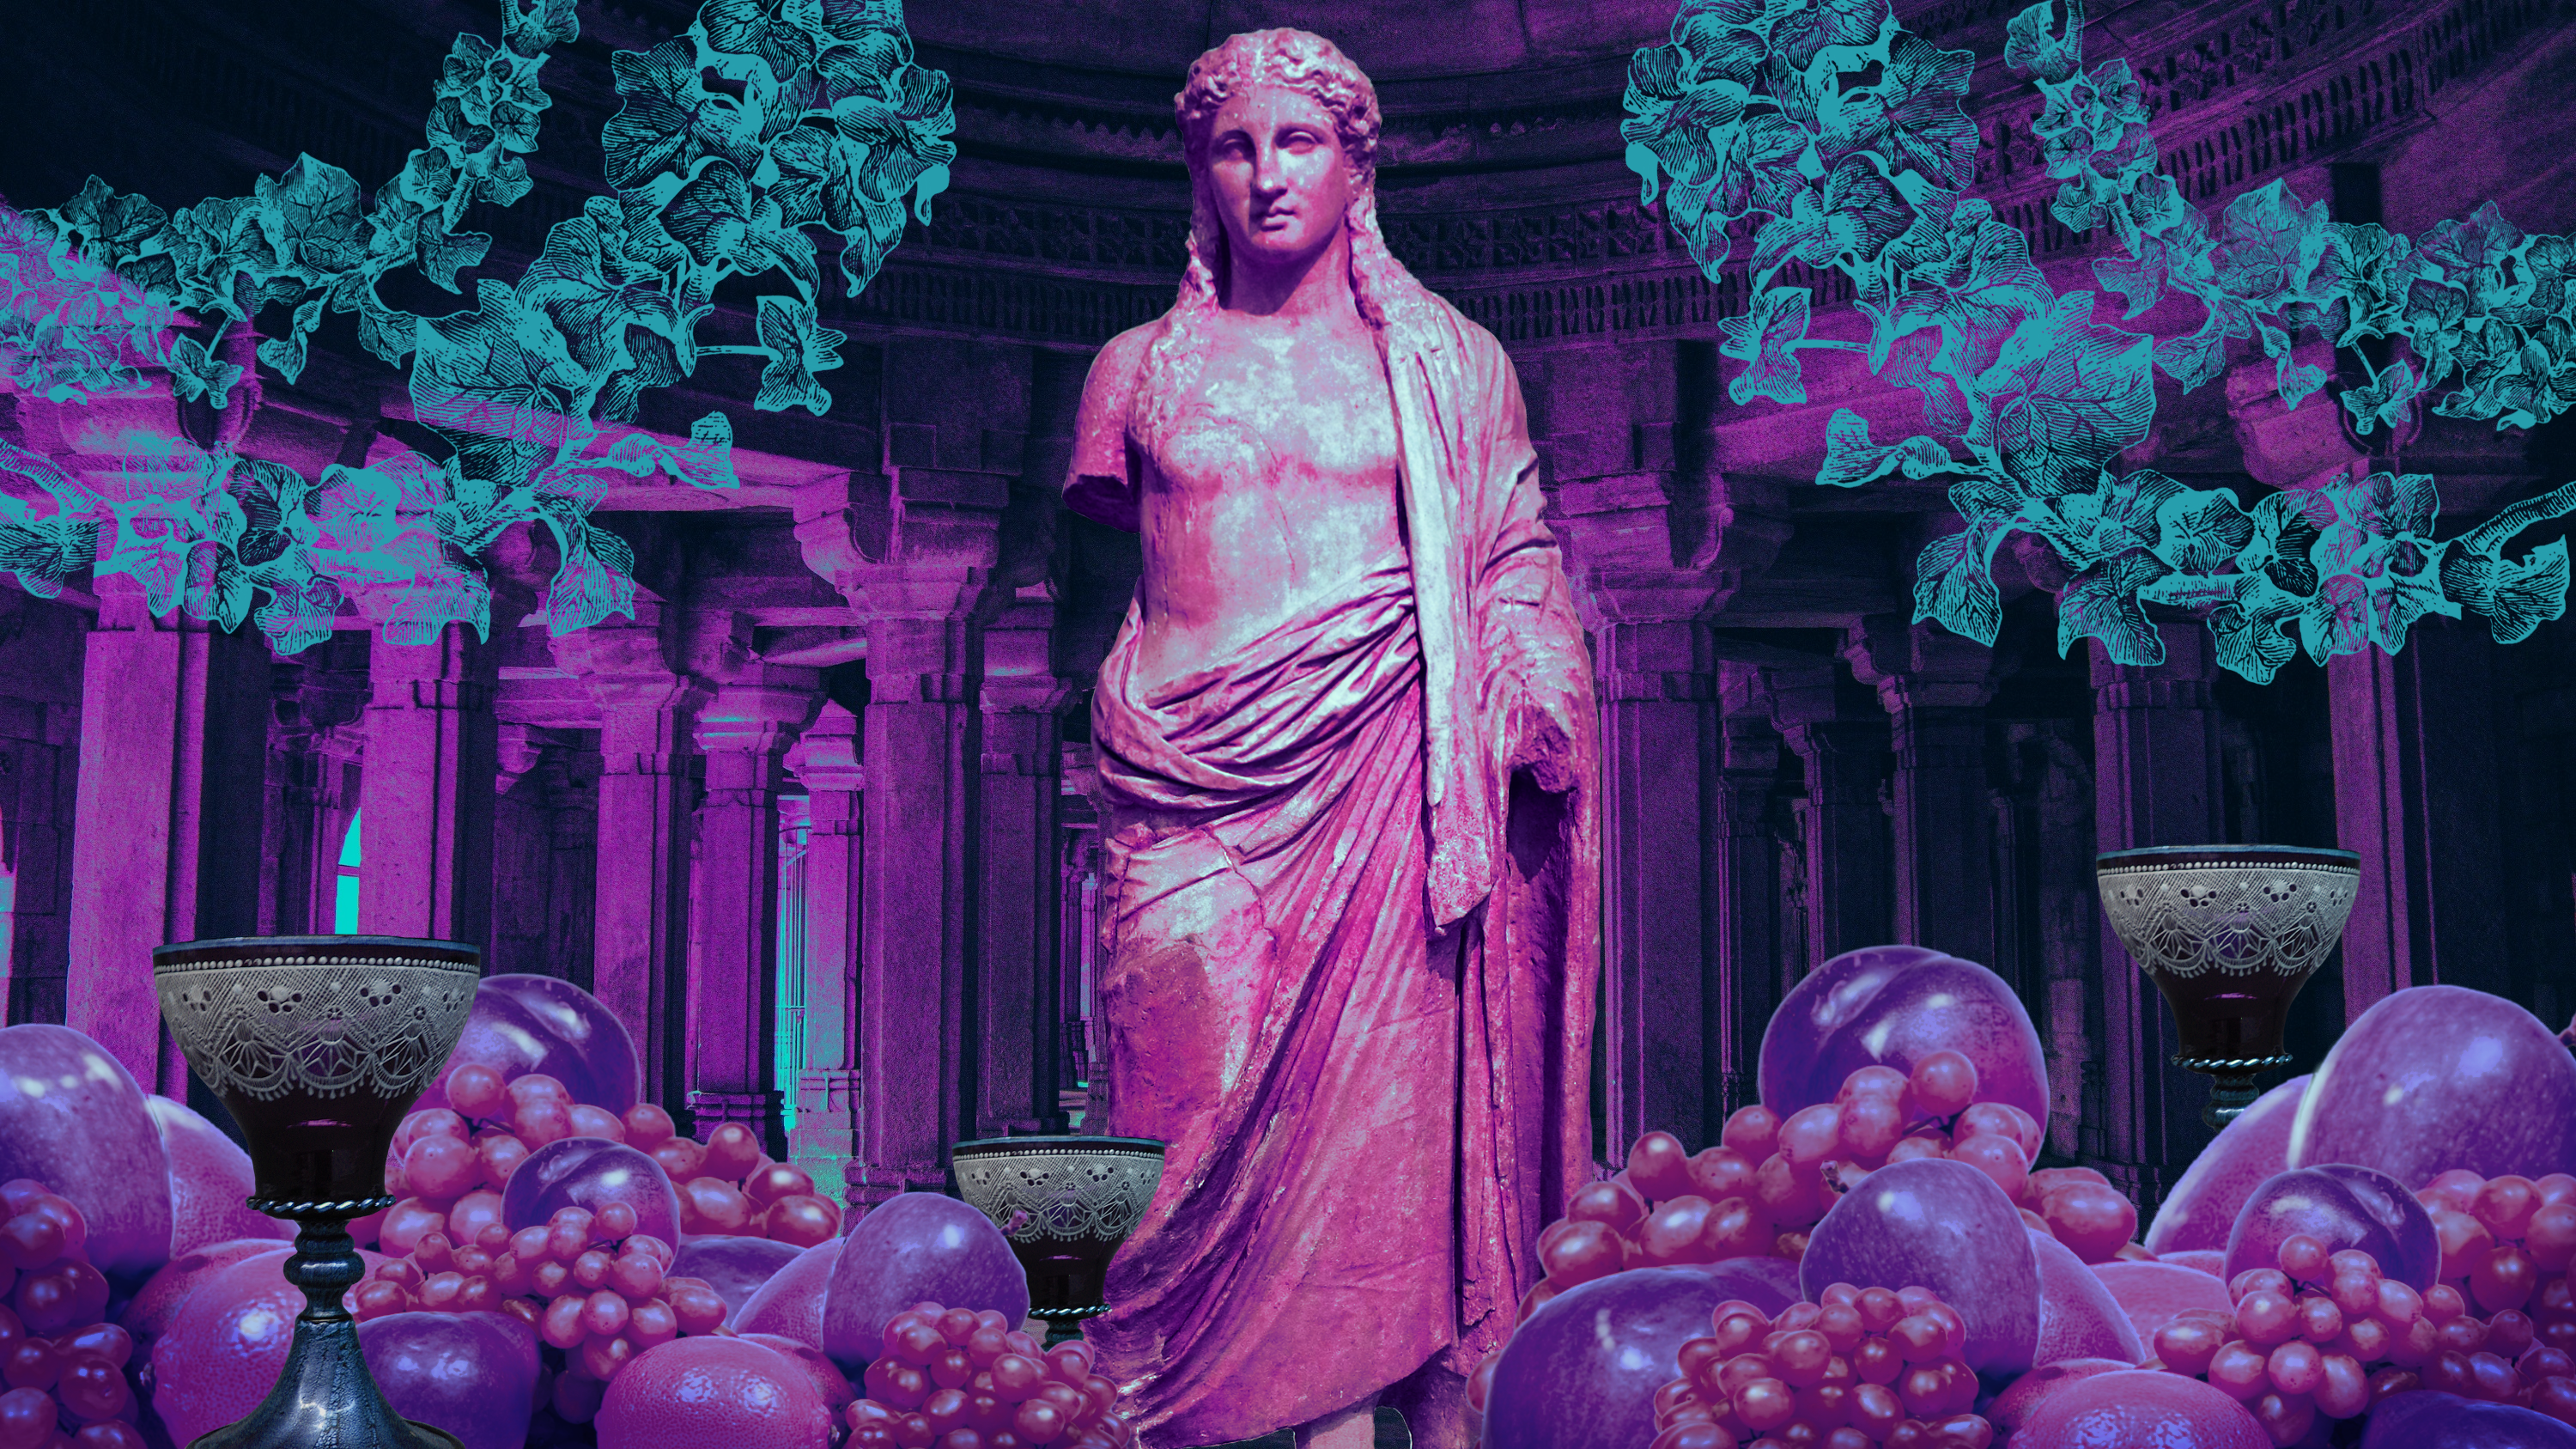 My virtual altar, which depicts the interior of a temple, a statue of Dionysus, an abundance of fruits and grapes as well as wine goblets, and strings of ivy.